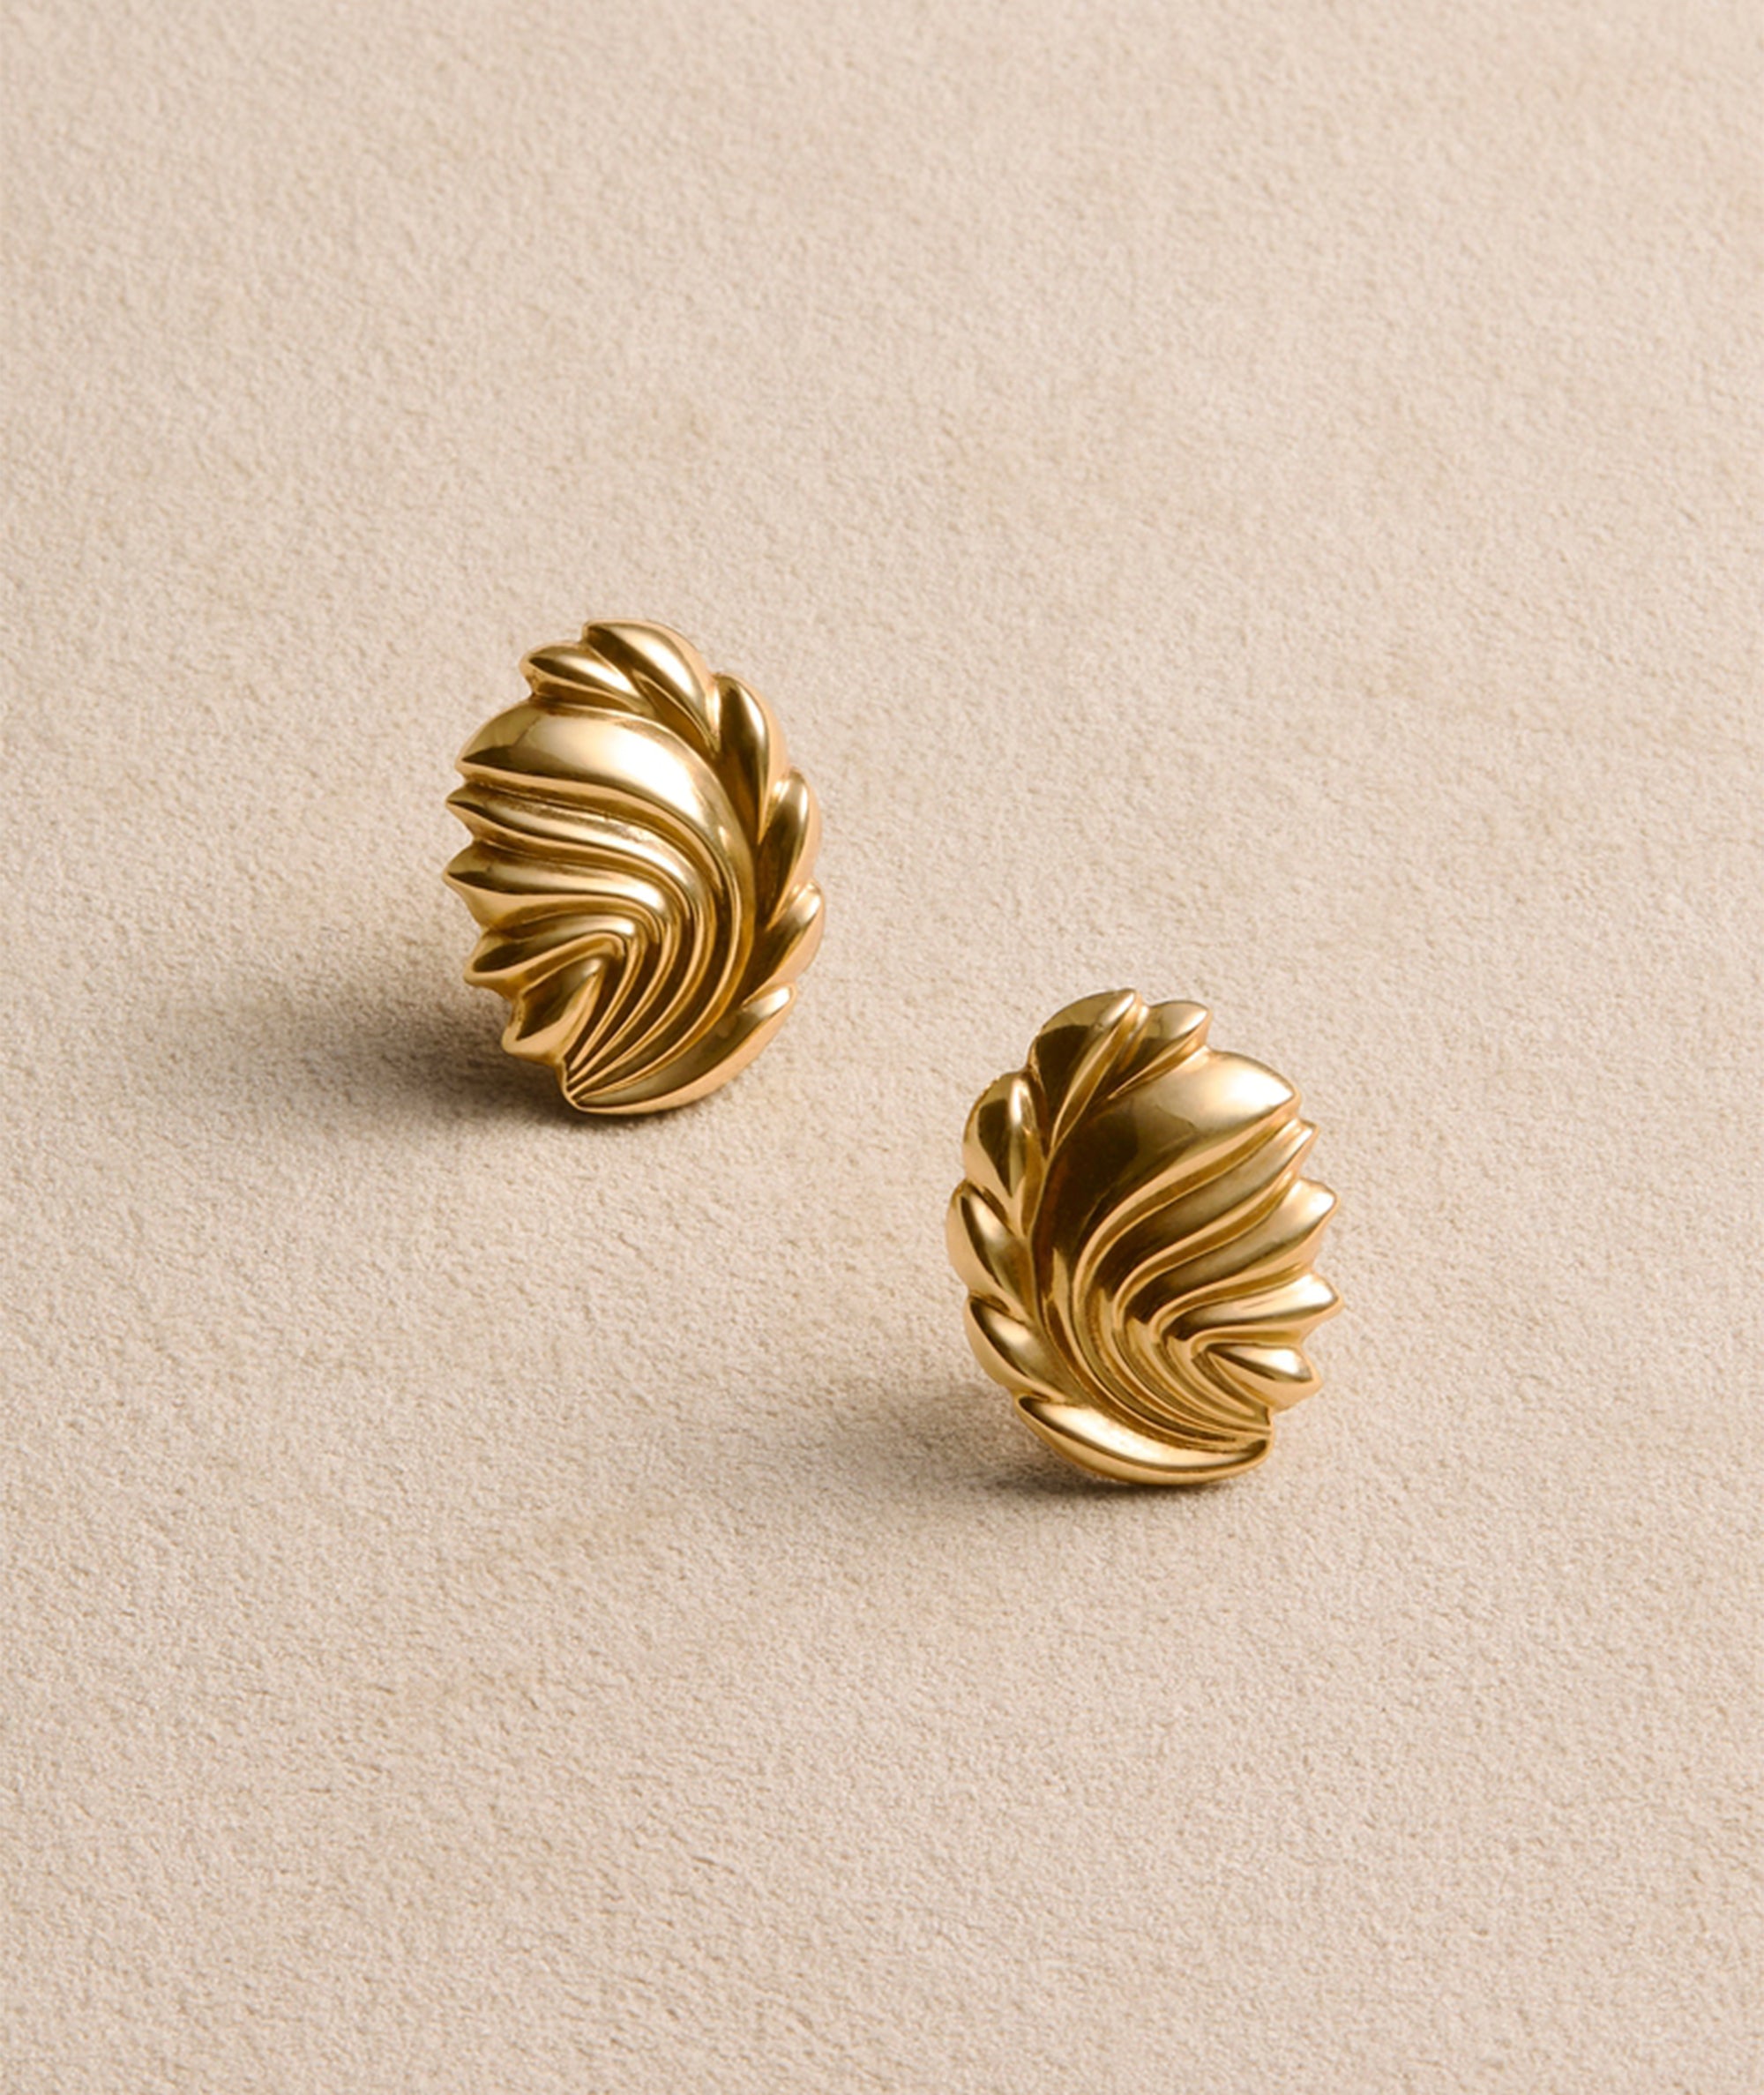 Vintage earrings in yellow gold. Exclusively sourced for EREDE Curated.